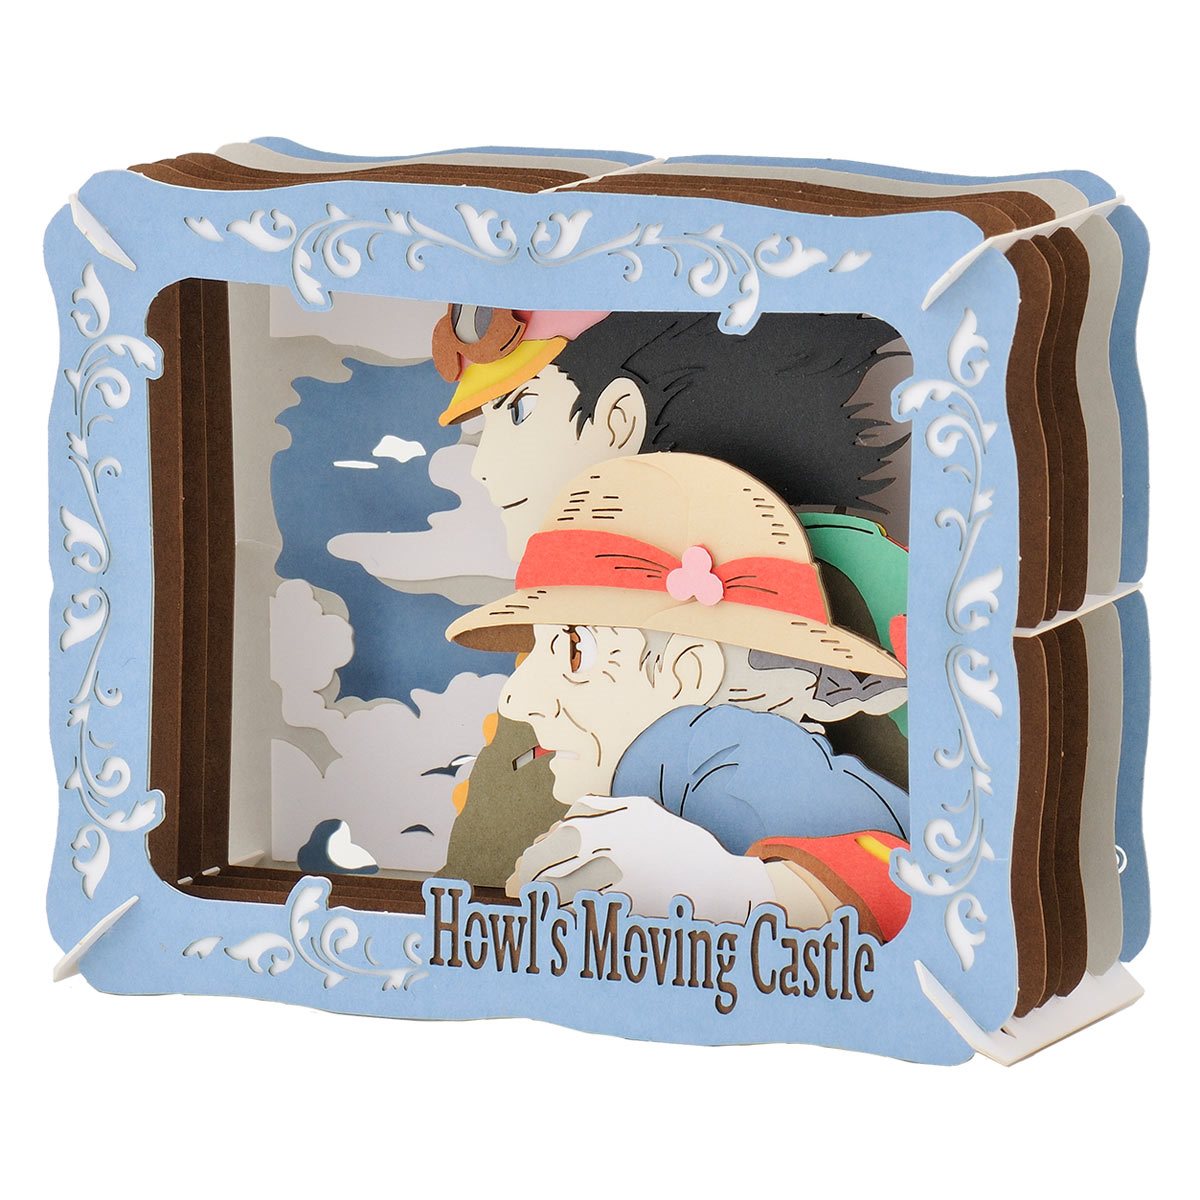 Howl's Moving Castle Resolution Paper Theater